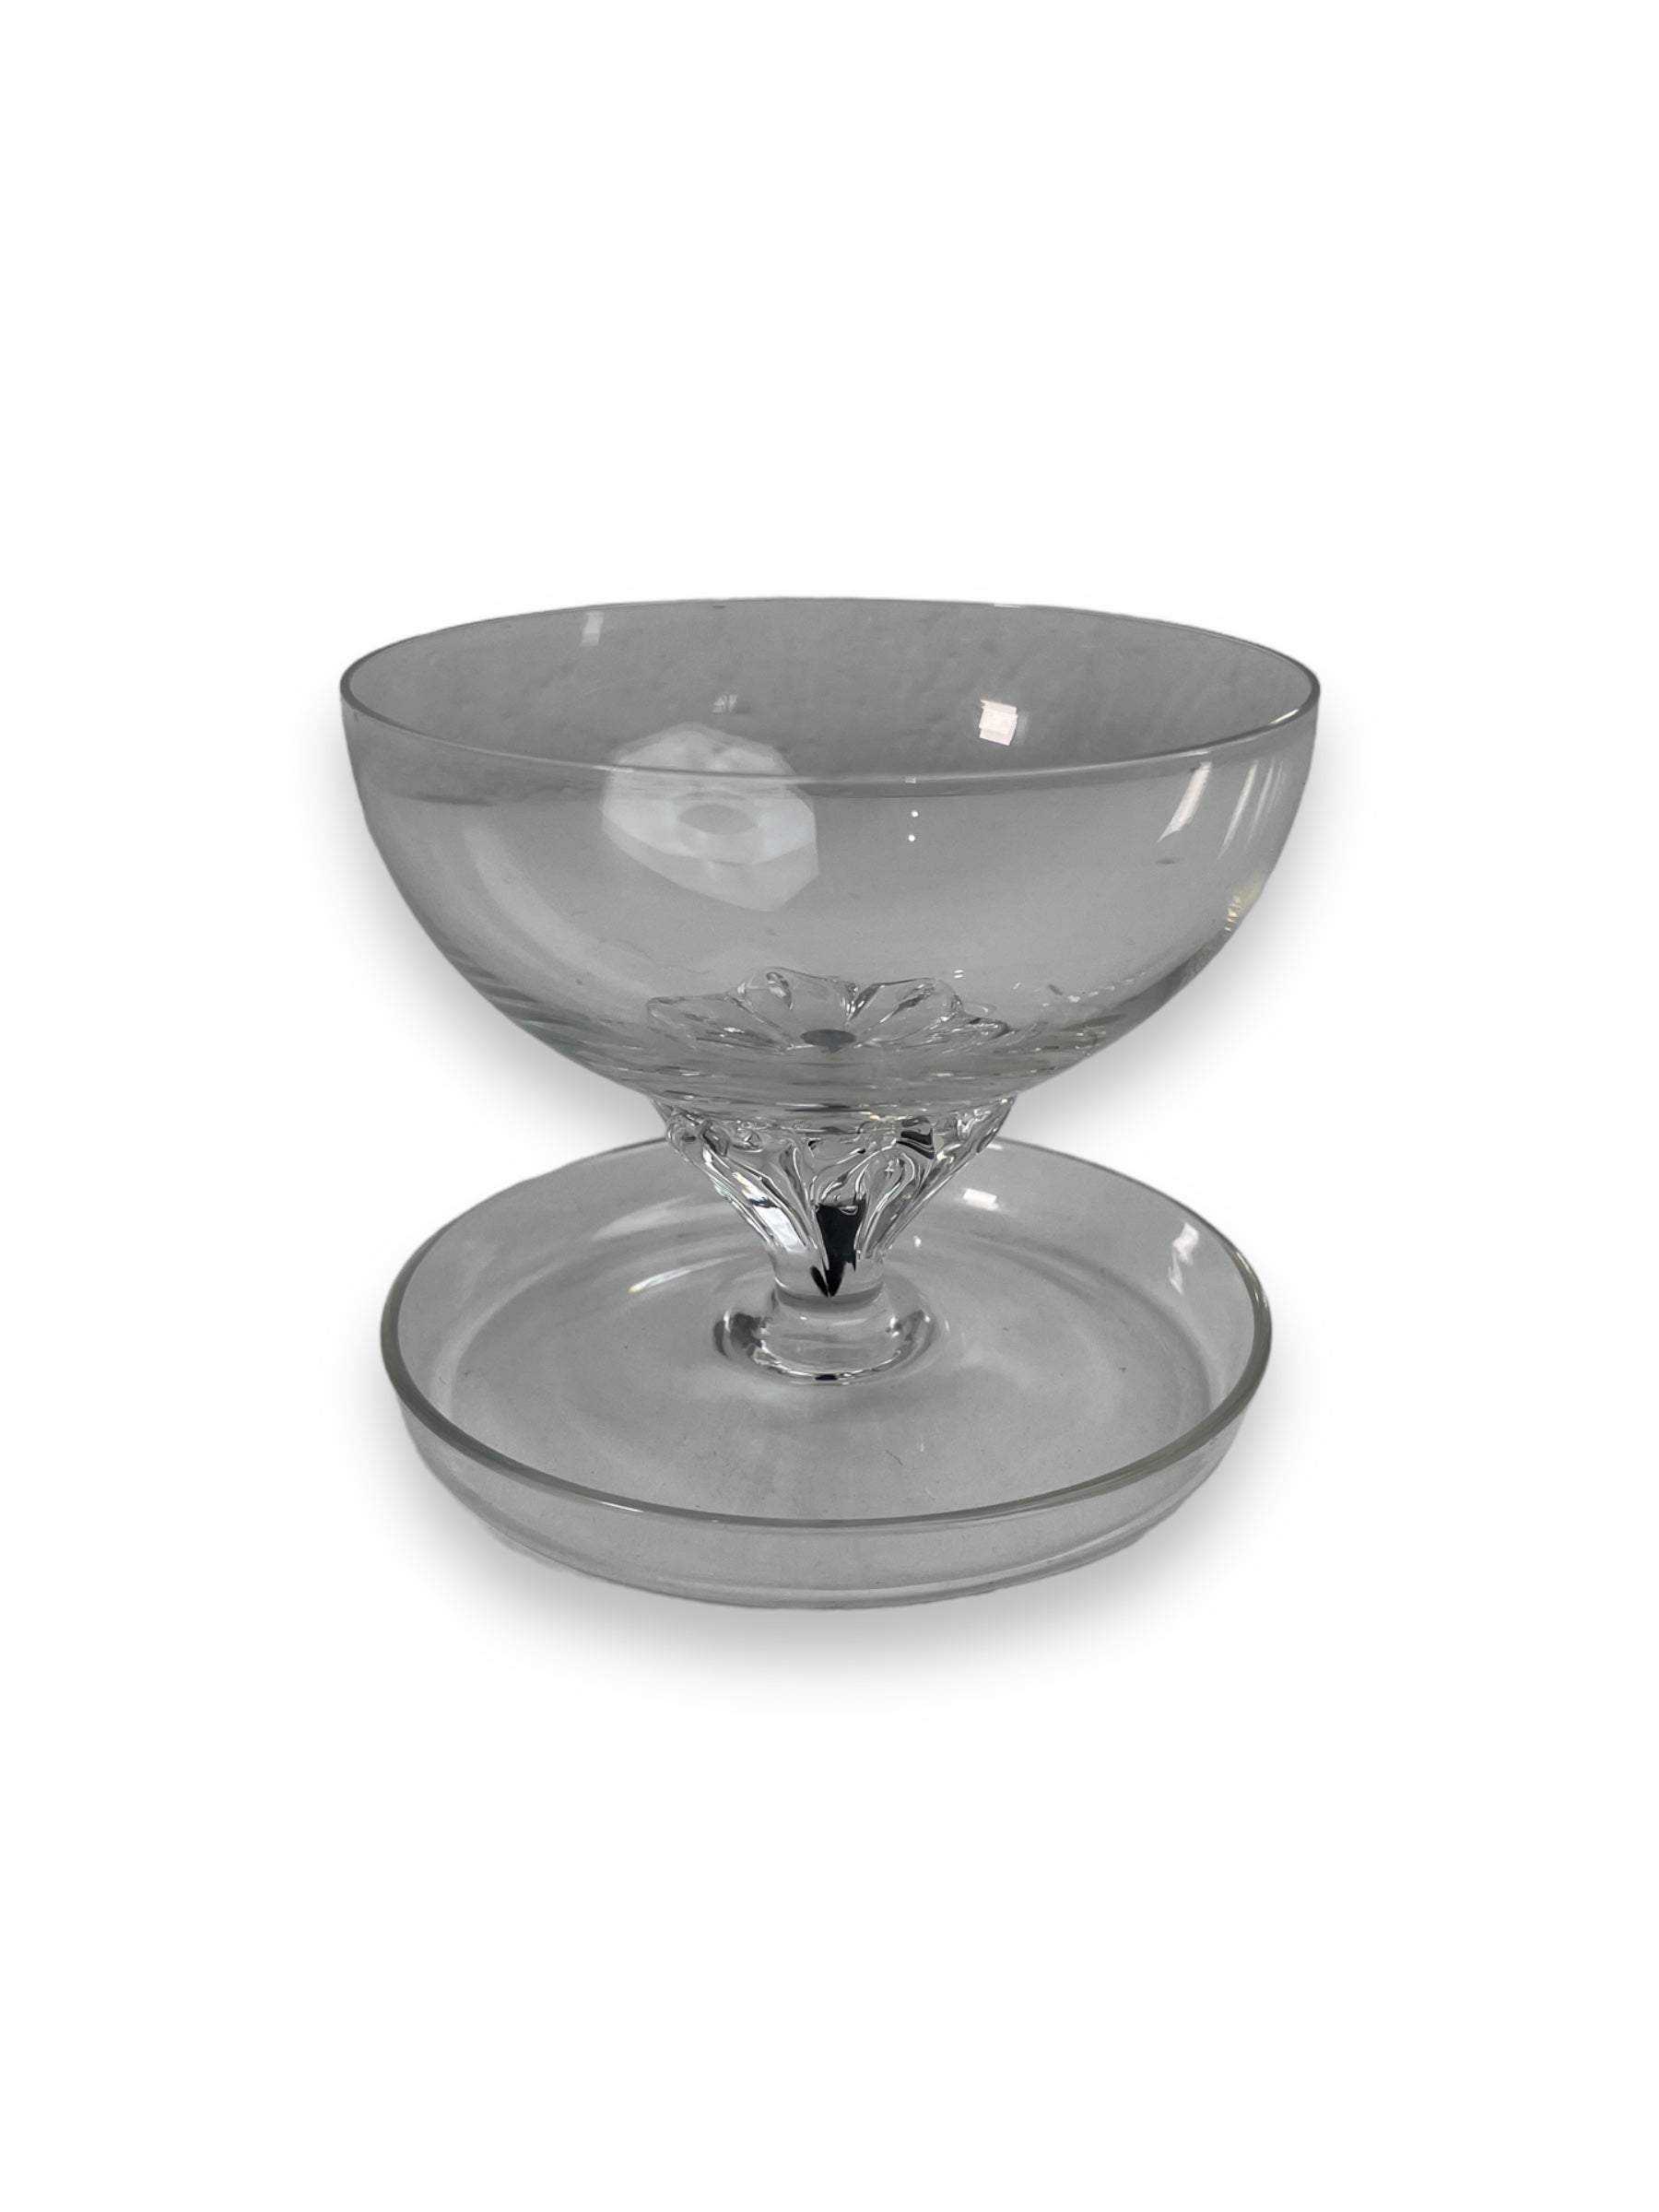 Belfor Crystal Exquisite Pattern Footed Dessert Glass